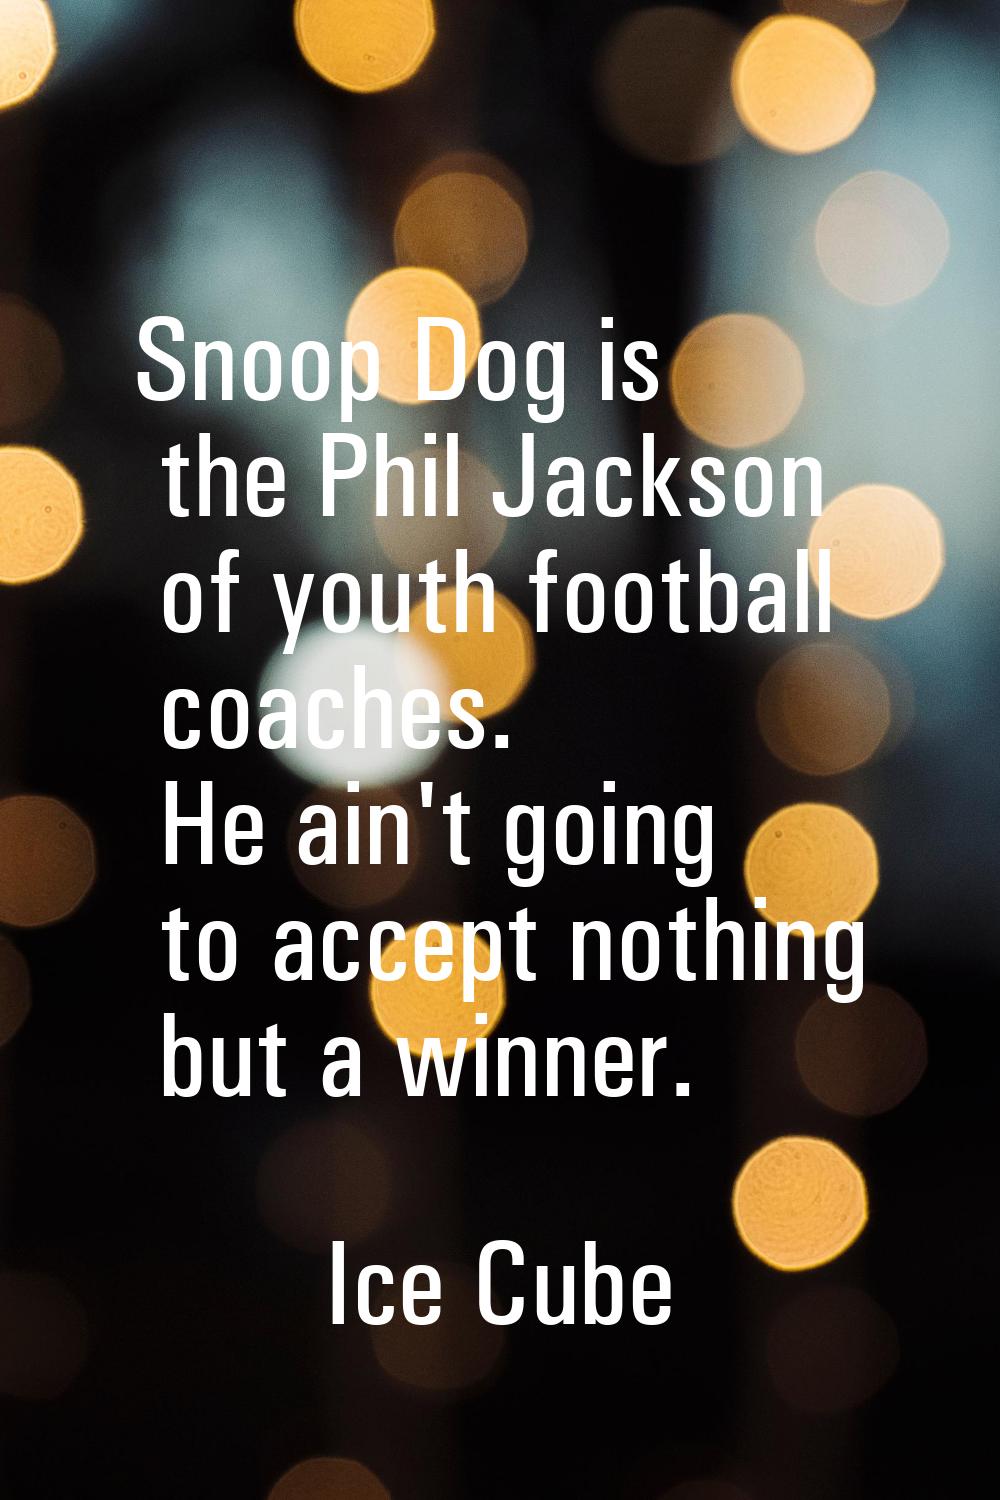 Snoop Dog is the Phil Jackson of youth football coaches. He ain't going to accept nothing but a win